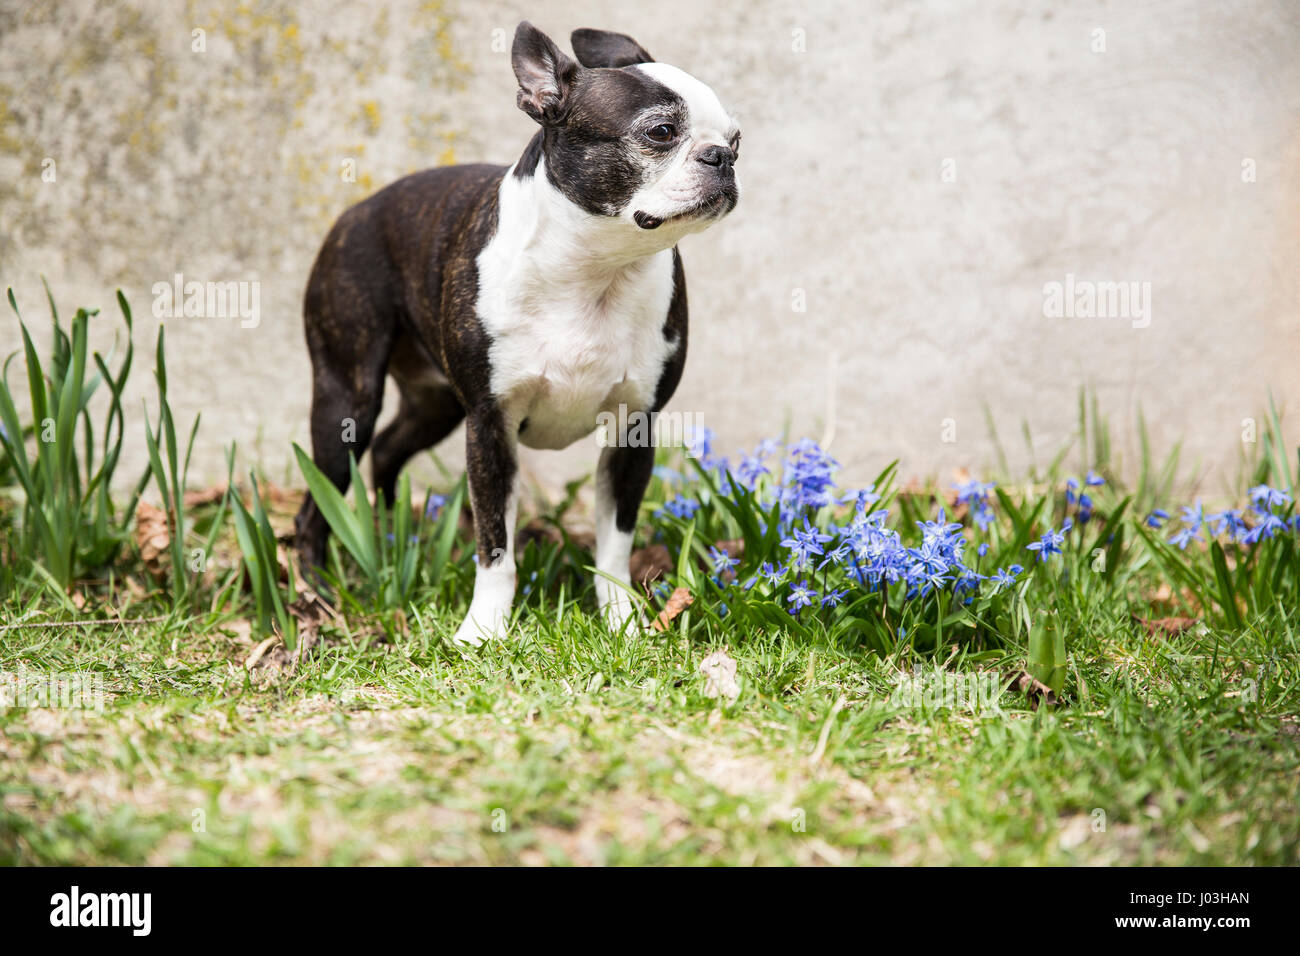 A small Boston terrier poses in the grass among purple spring flowers Stock Photo